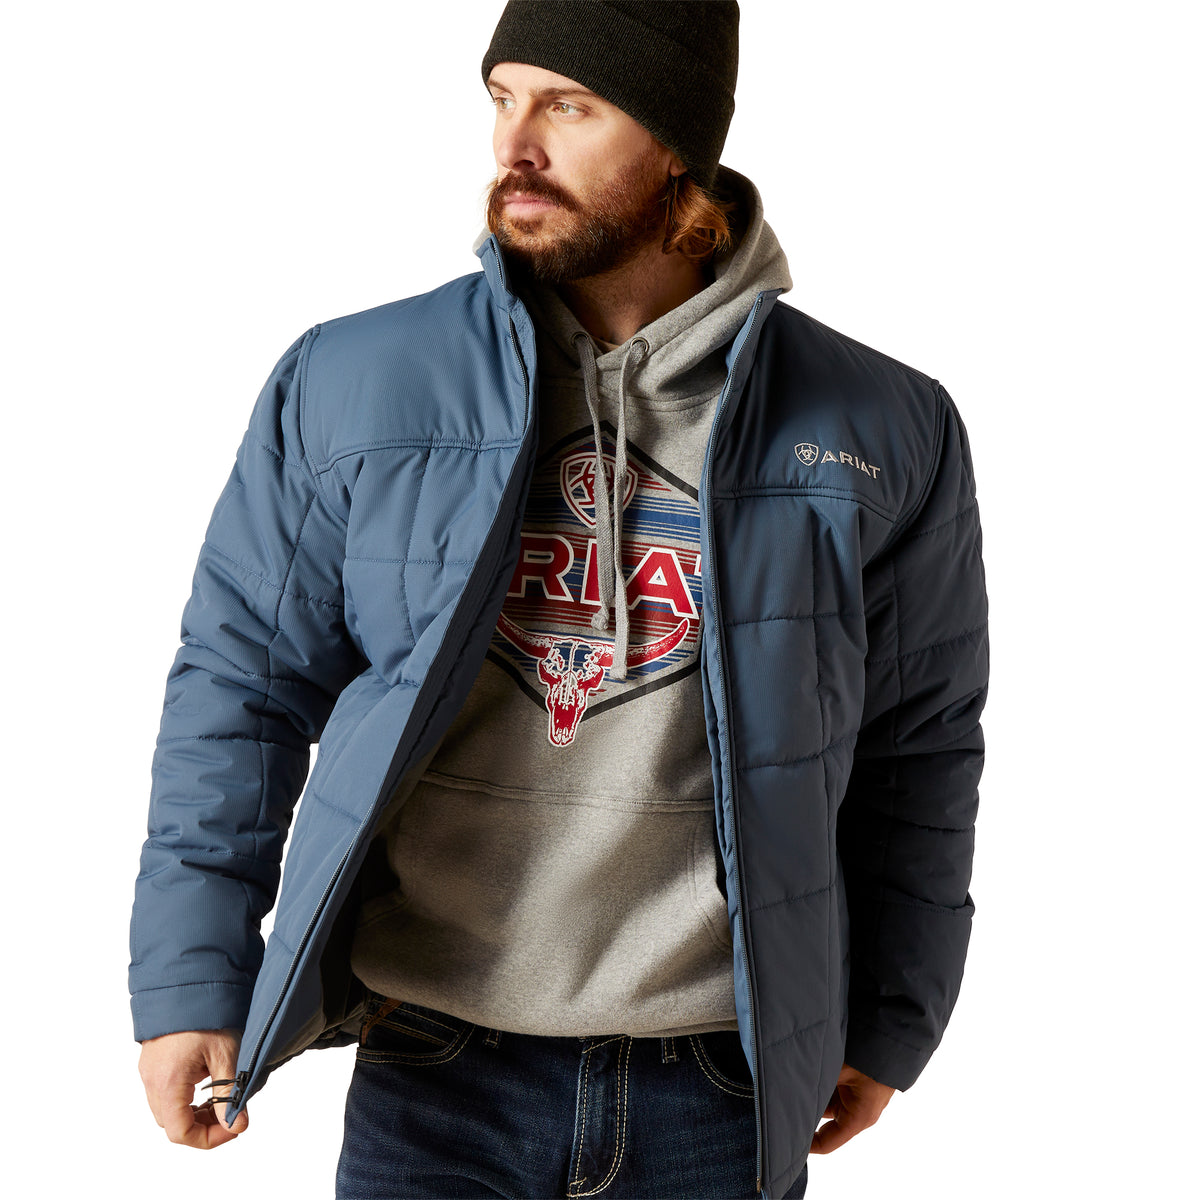 ARIAT MEN’S CRIUS INSULATED JACKET - STEELY